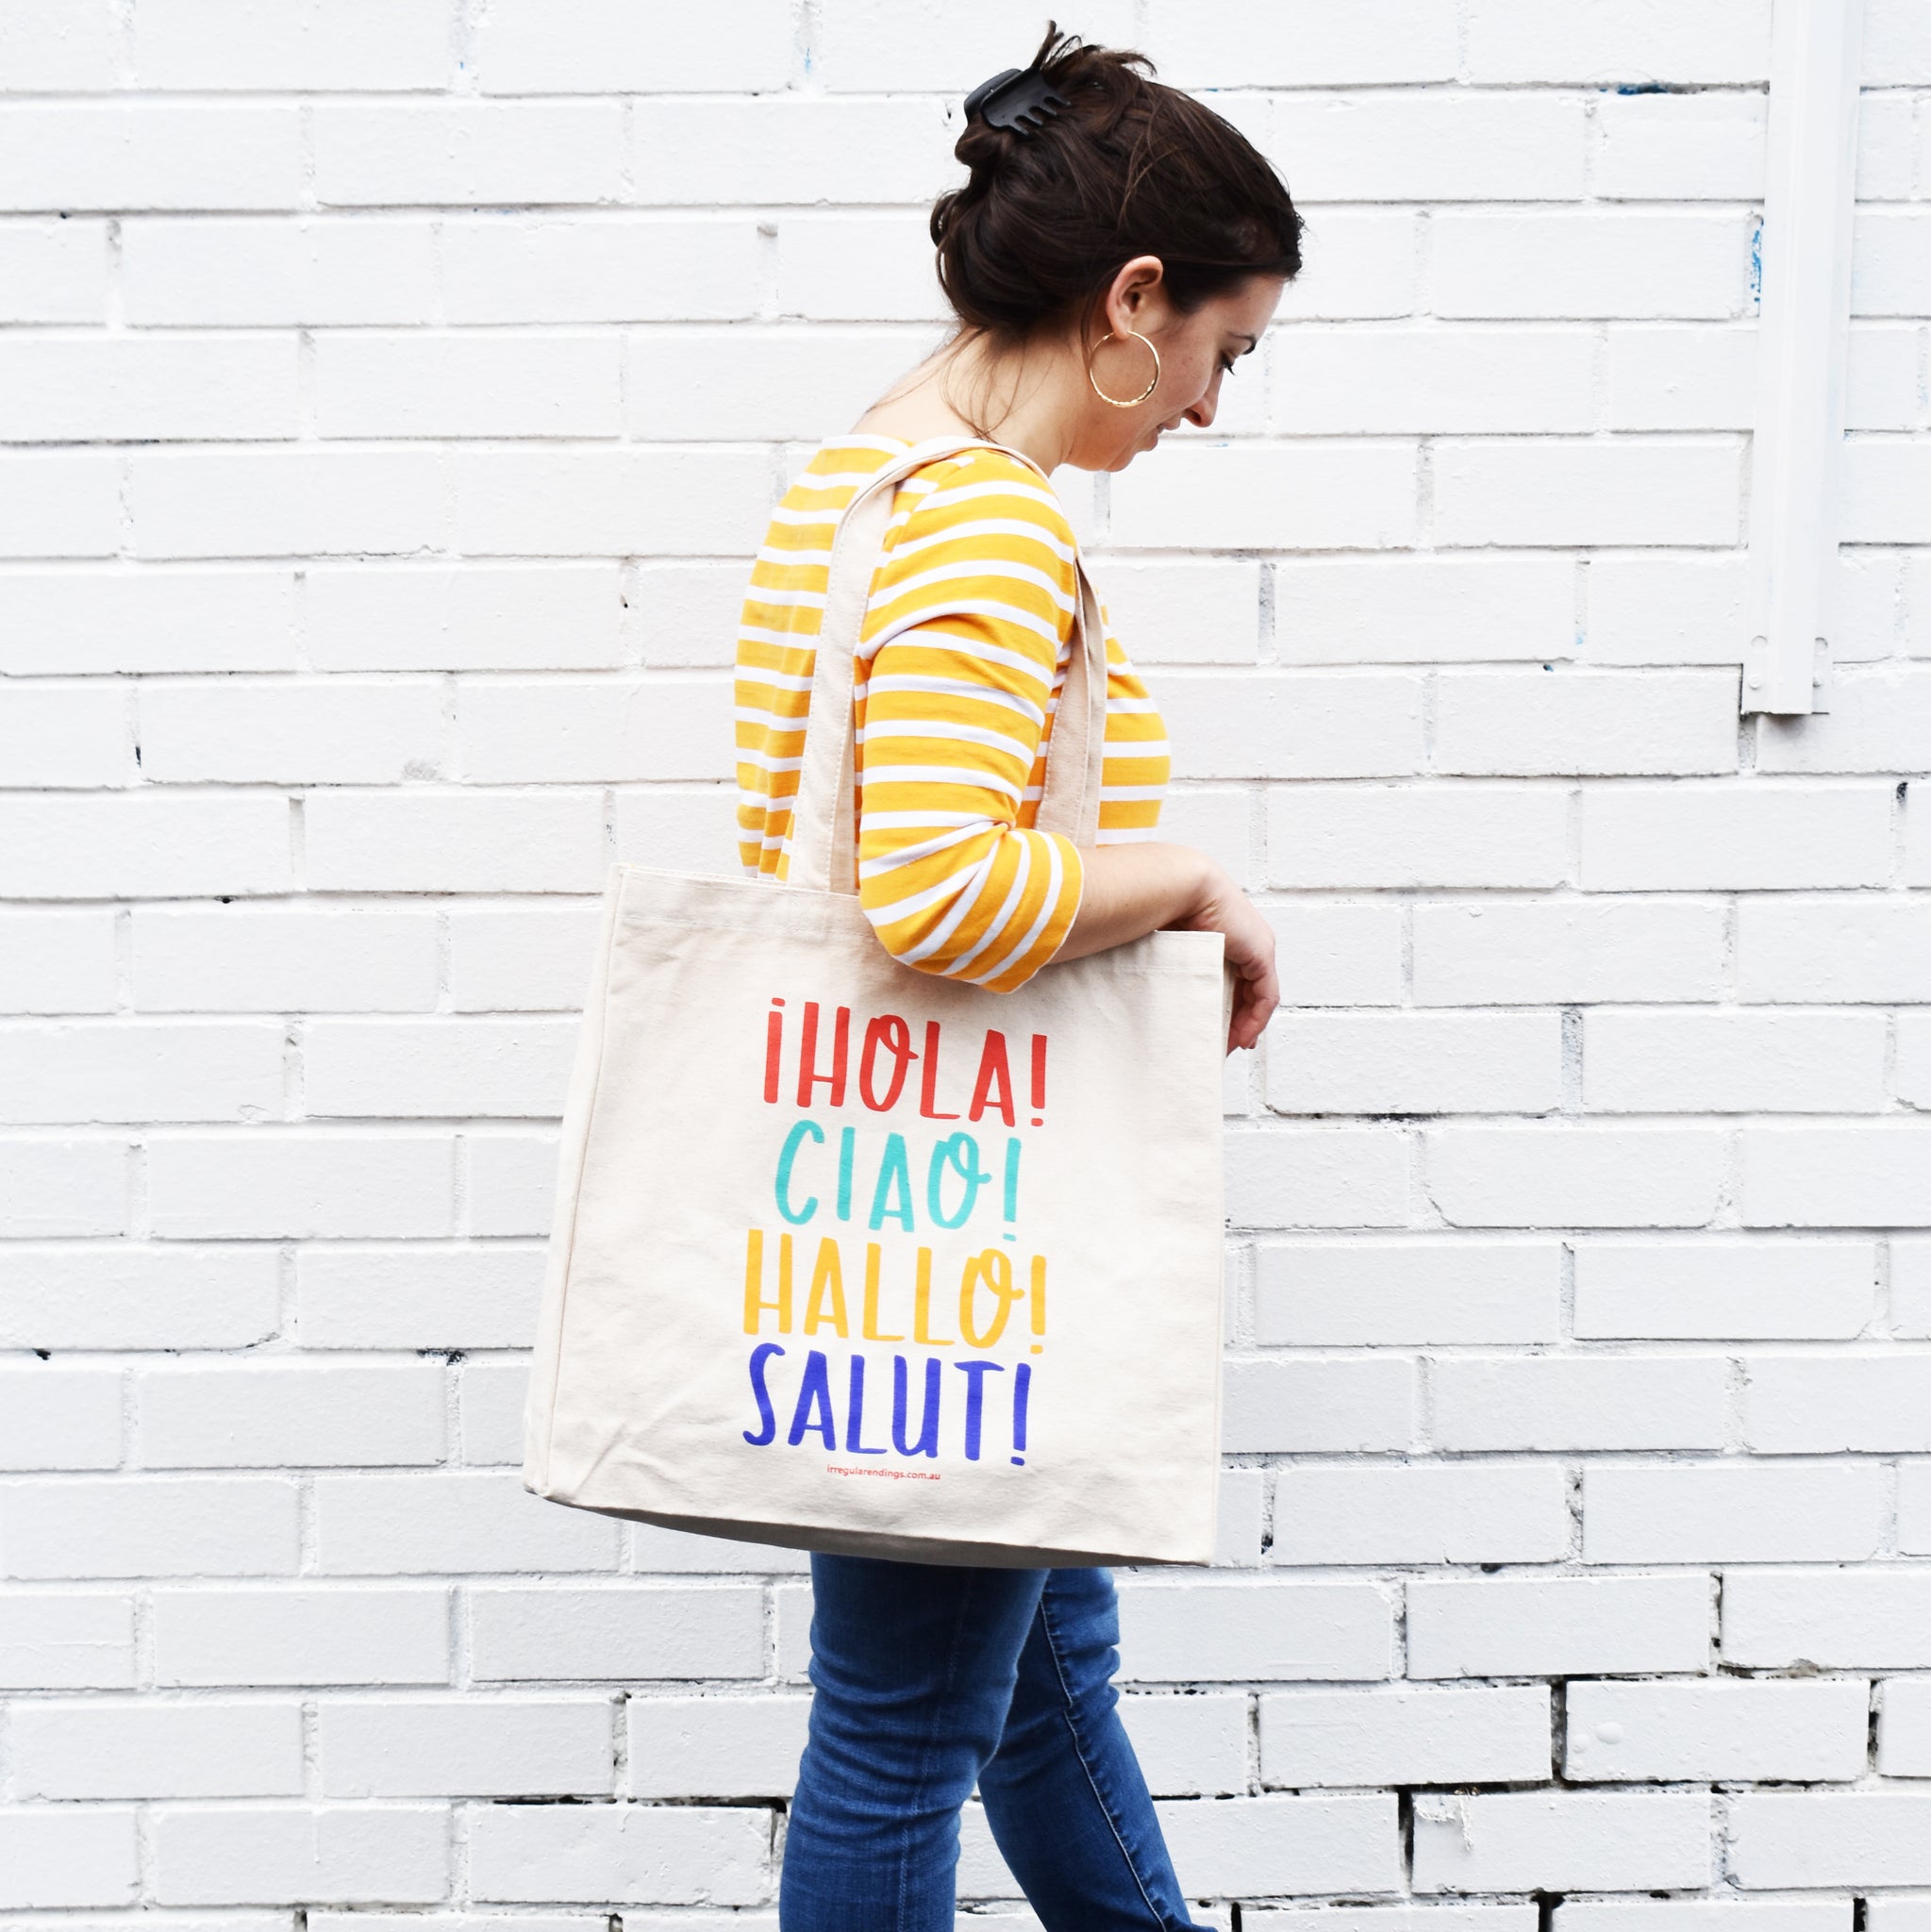 Hello Tote Bag - 100% Cotton Canvas Tote with design in Spanish, Itali – Irregular Endings